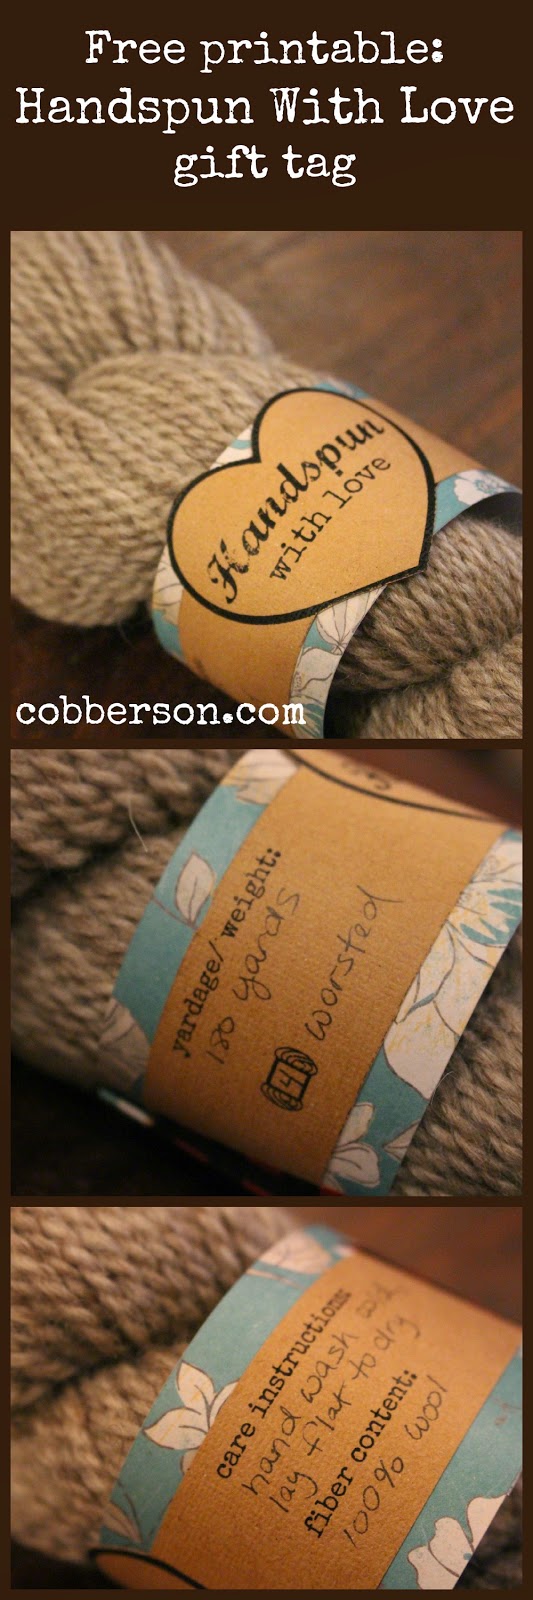 Cobberson & Co. Handspun with love free printable gift tag